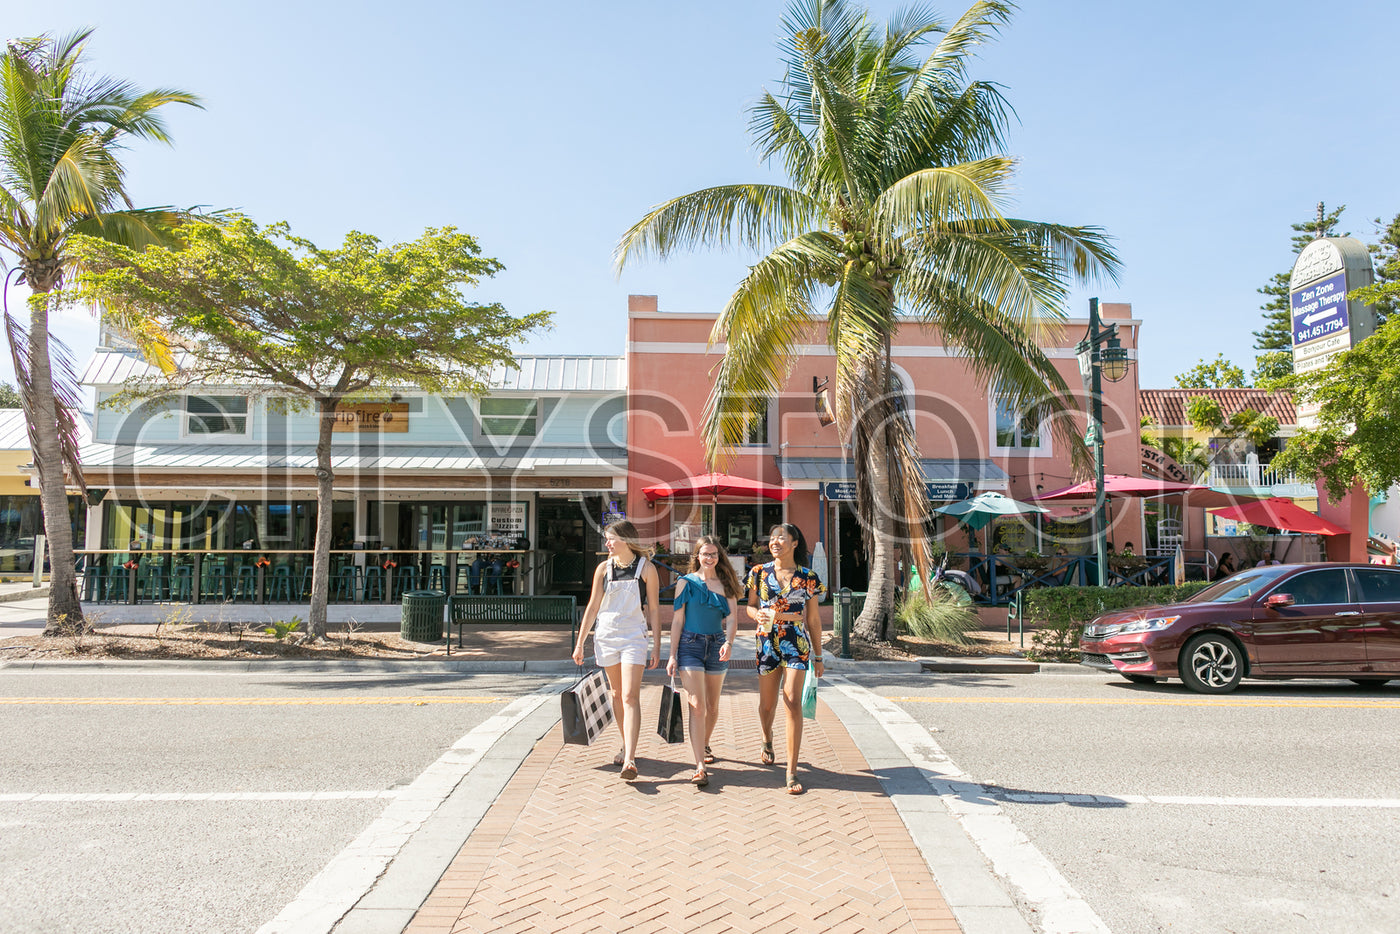 Friends walking on a sunny Sarasota street with palm trees